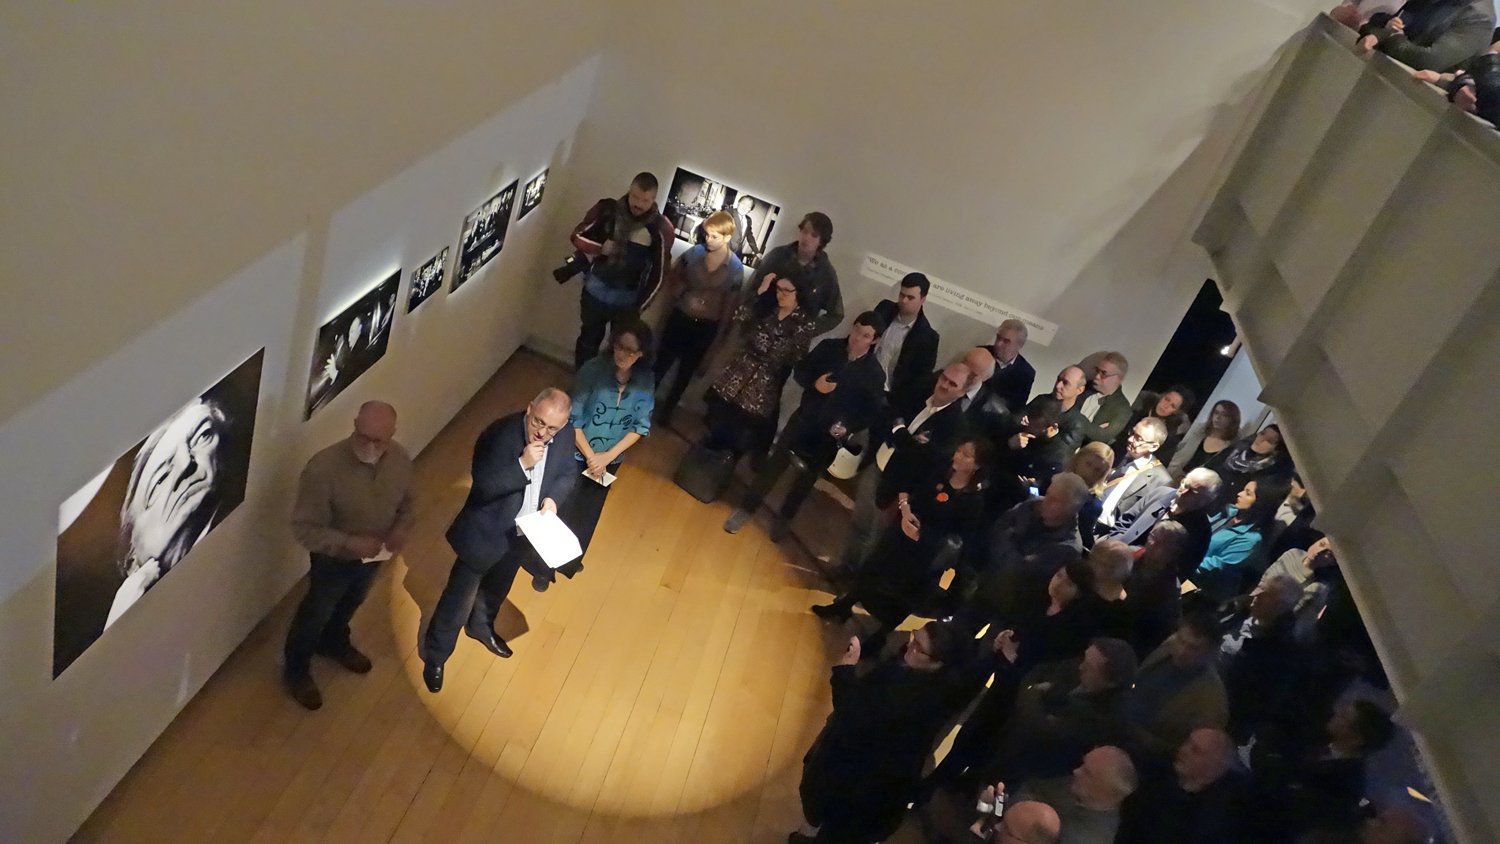  Prof. Kevin Rafter (speaking) with Photographer Eamonn Farrell and Curator Tanya Kiang on Opening Night 